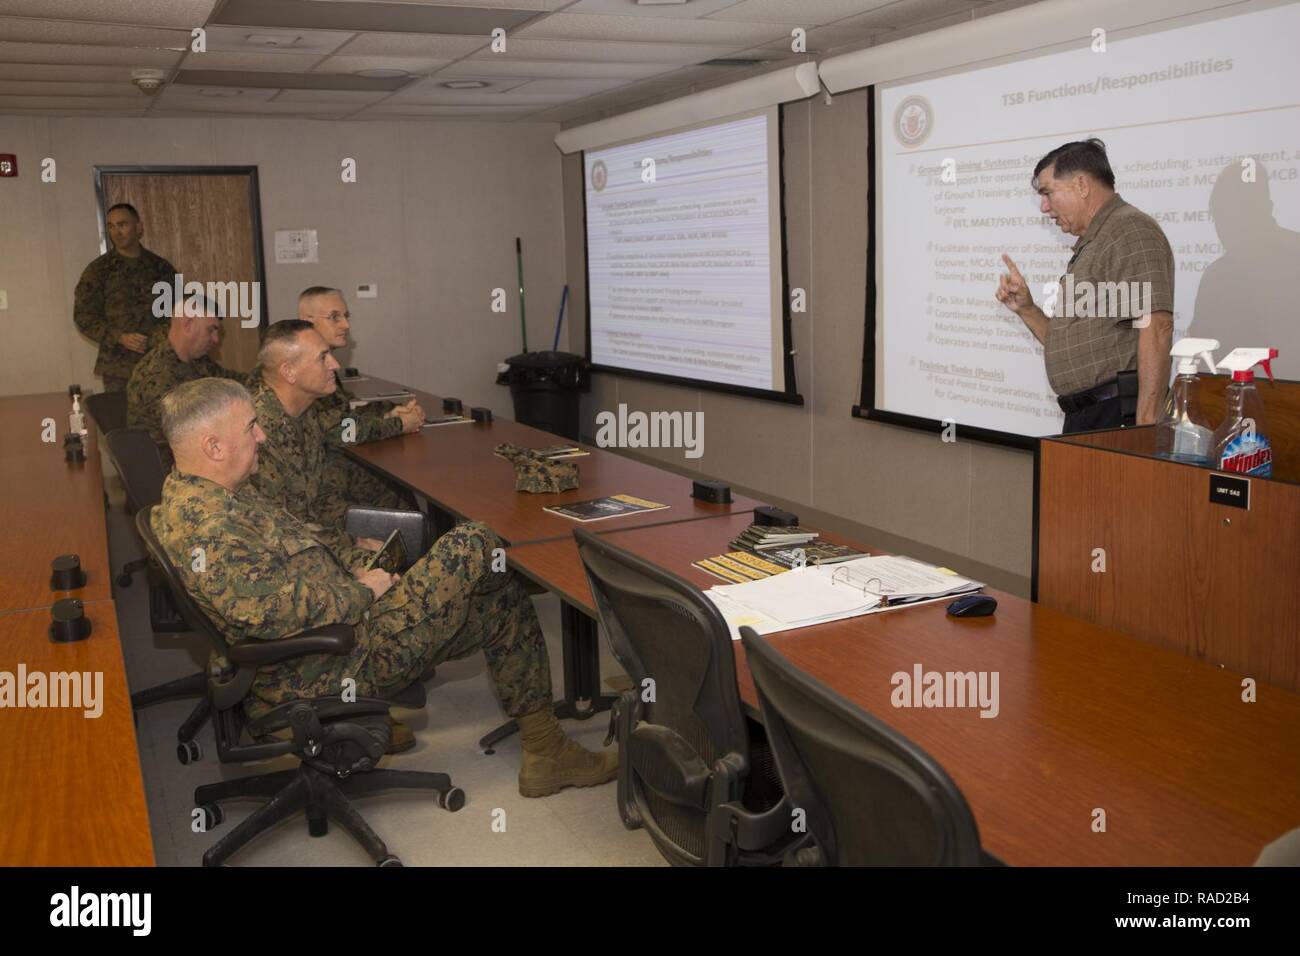 Mr. Lance Jeffrey, right, Training Support Center Lead, Training and Education Command, briefs Gen. Glenn Walters the Assistant Commandant of the Marine Corps and senior leaders on the usage of simulator training systems during a visit to Camp Lejeune, N.C., Jan. 26, 2017. The purpose of the visit was to increase awareness and capabilities of ground simulation and simulator training systems in support of operational forces combat readiness. Stock Photo